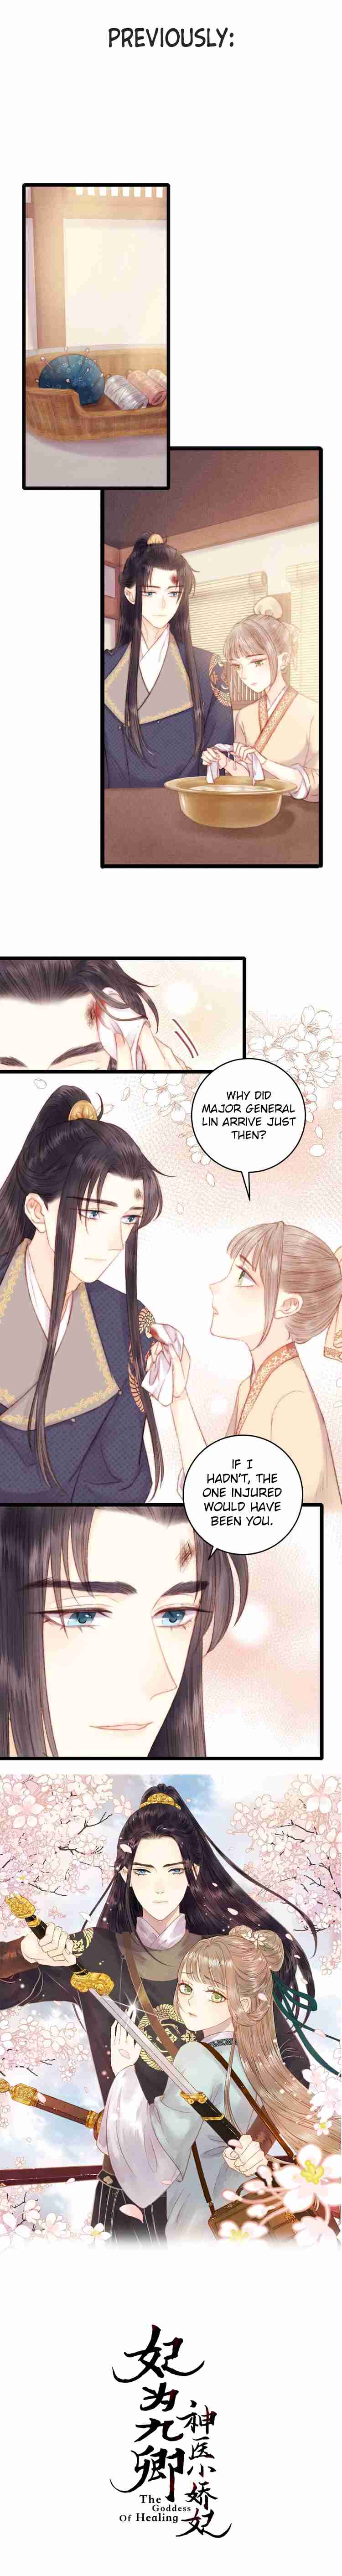 The Goddess of Healing Ch. 66 Love Rival?